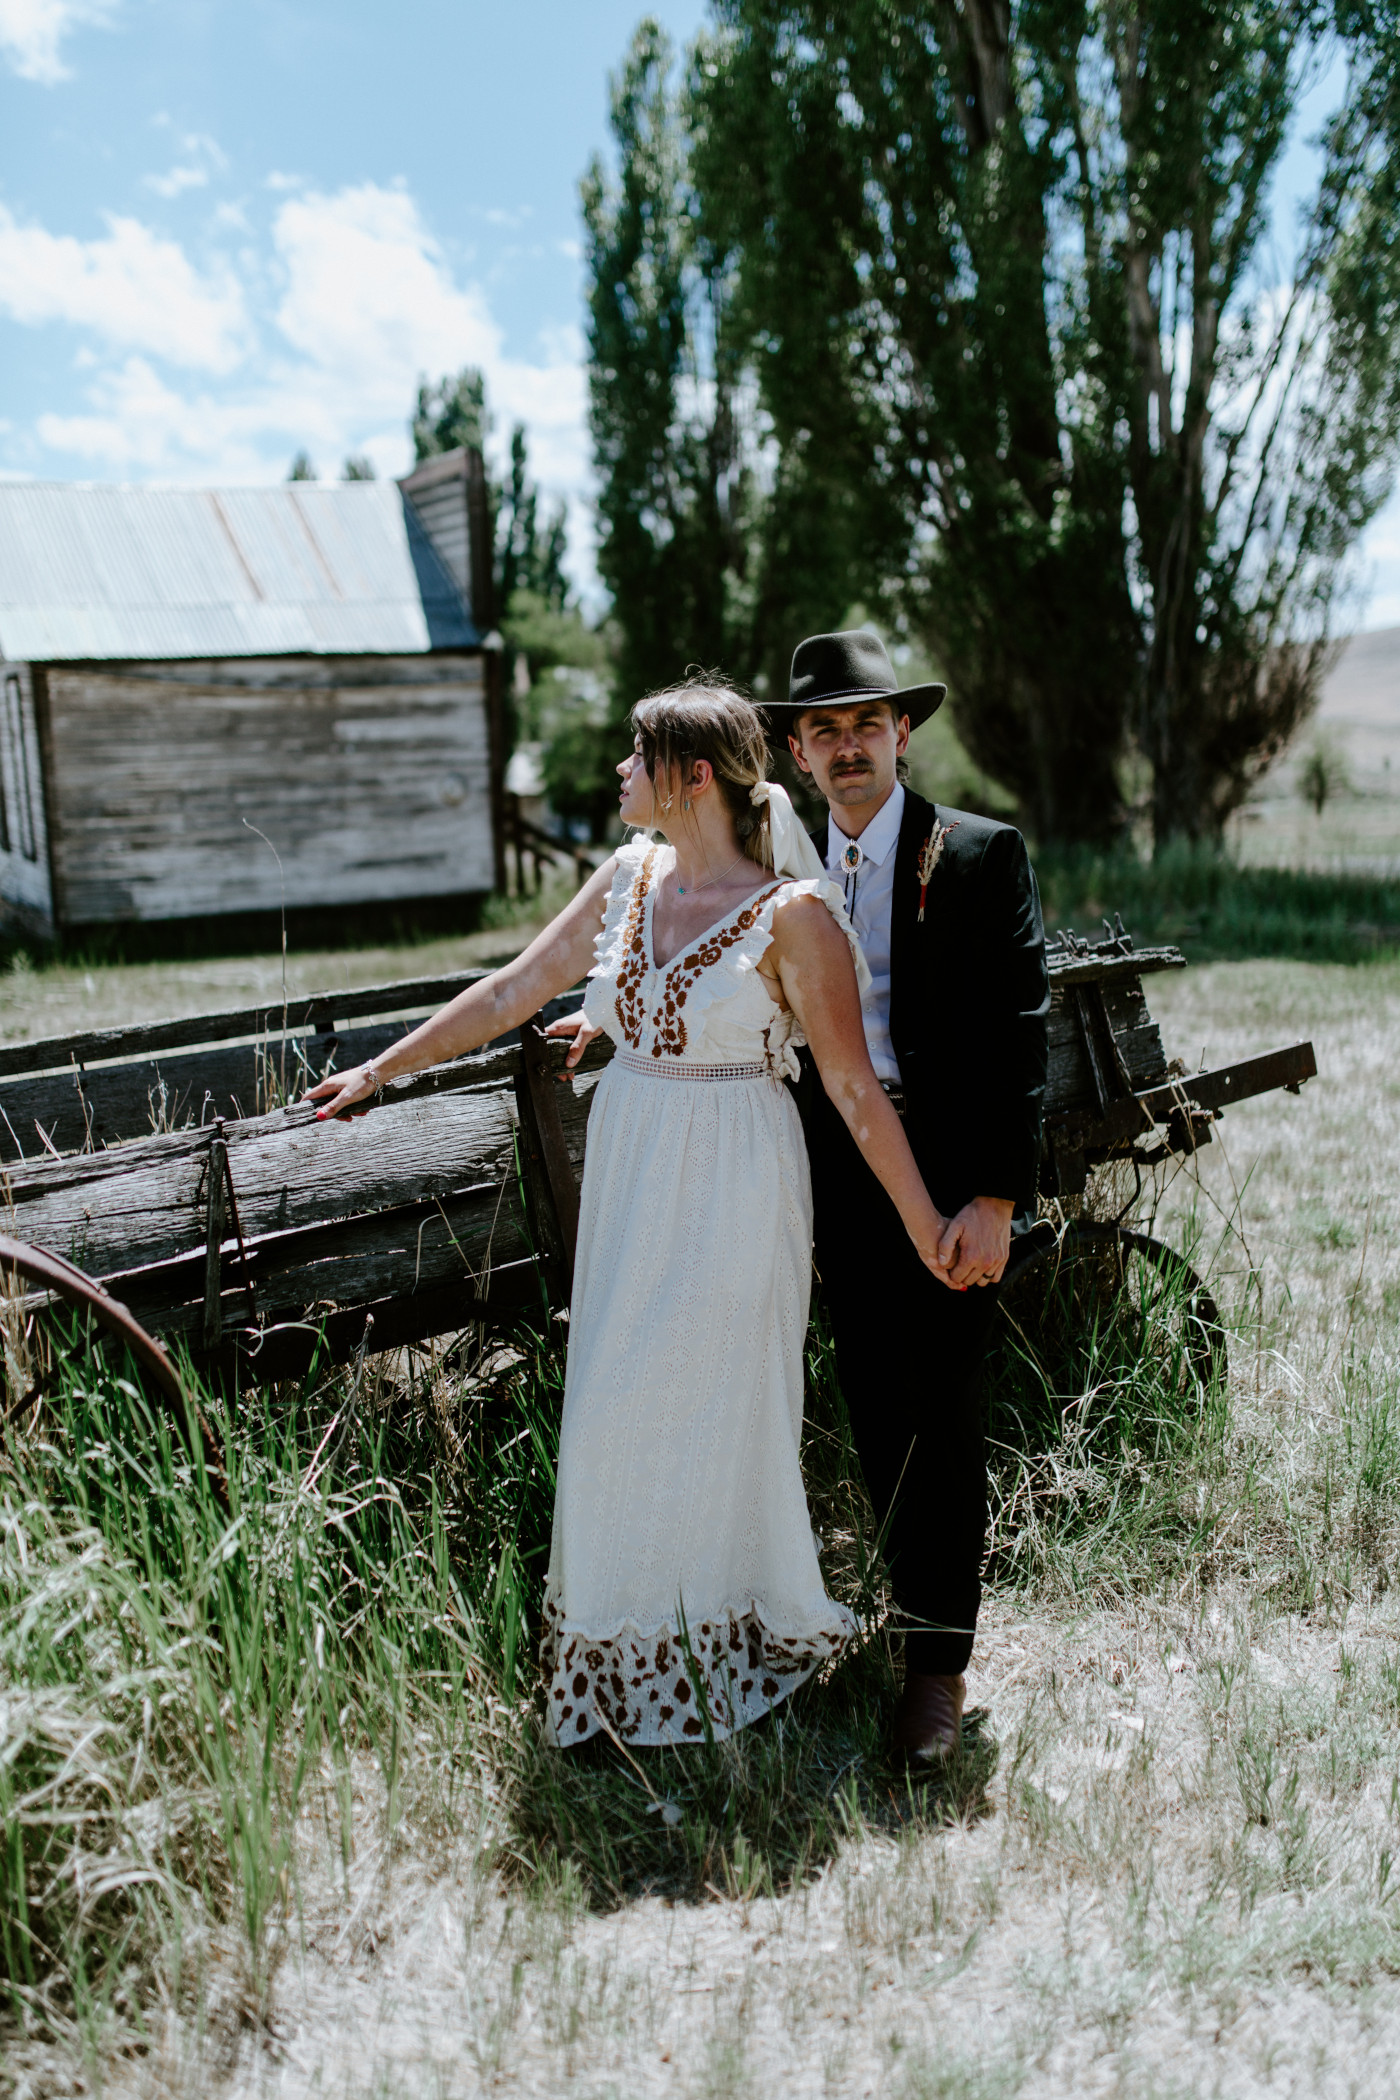 Greyson and Emily in a field. Elopement photography in the Central Oregon desert by Sienna Plus Josh.